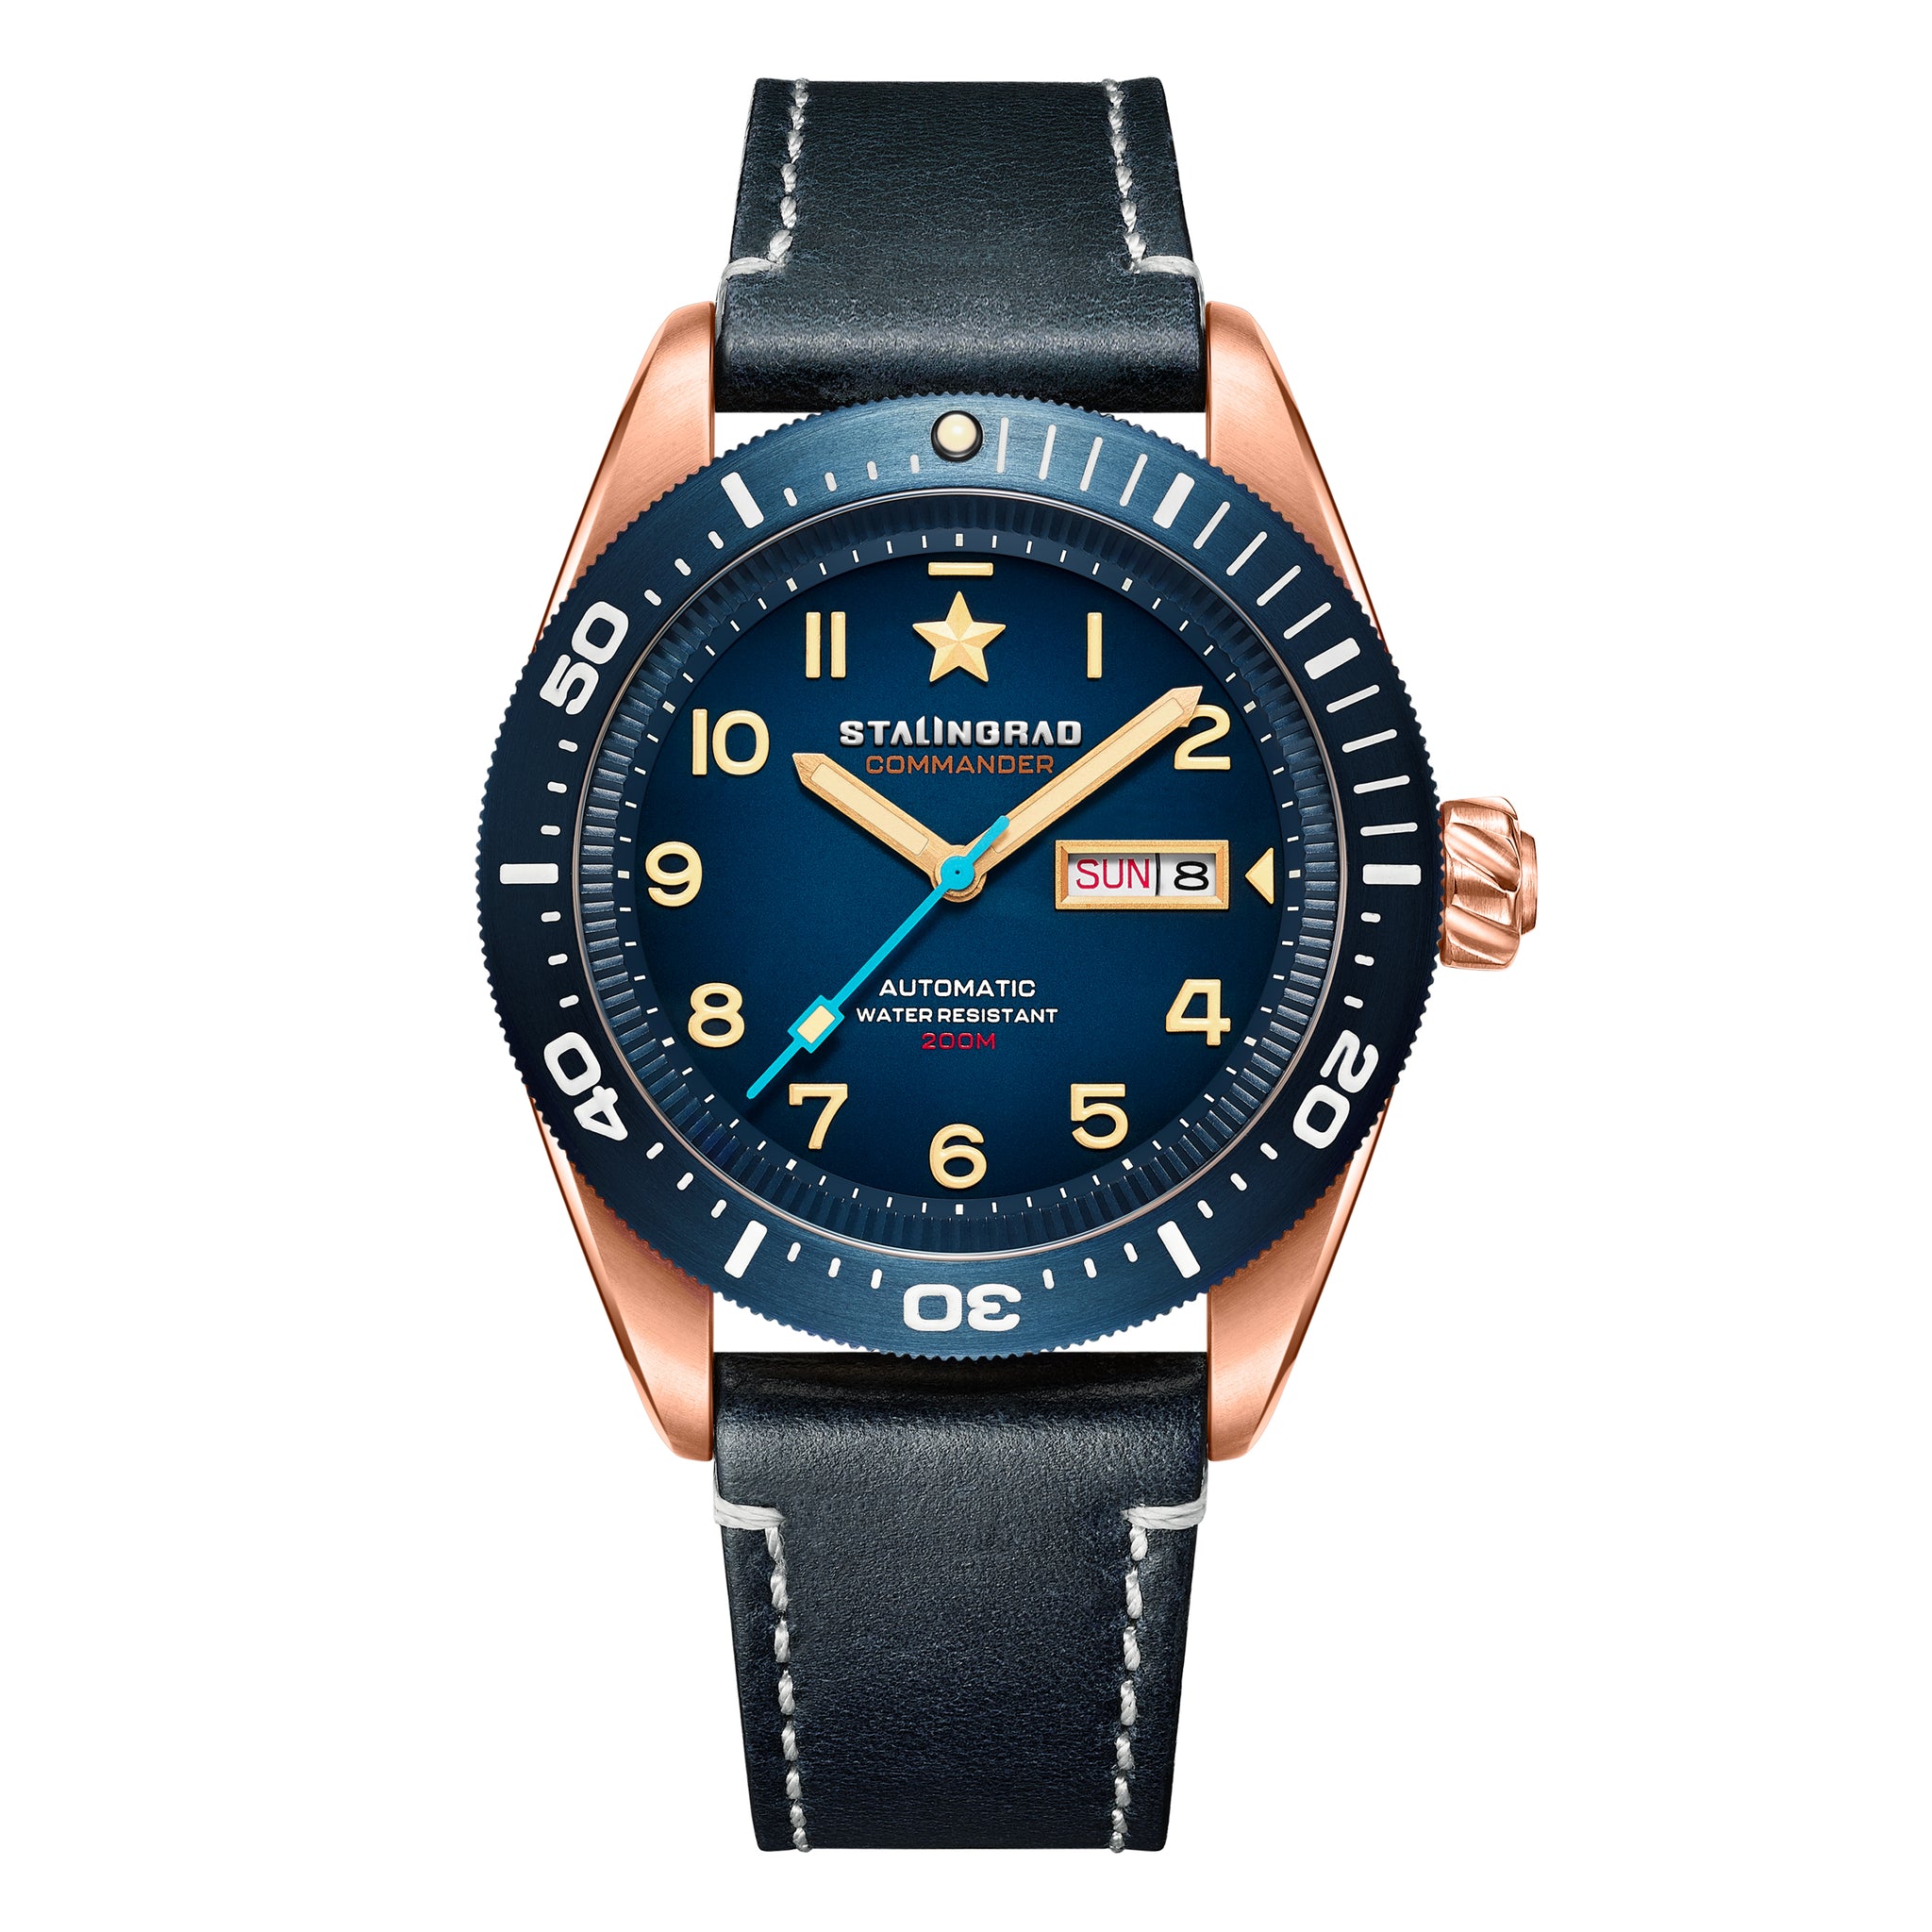 Stalingrad's  Commander Automatic Bronze Watch with Brass Bezel and Blue Dial front view on a white background